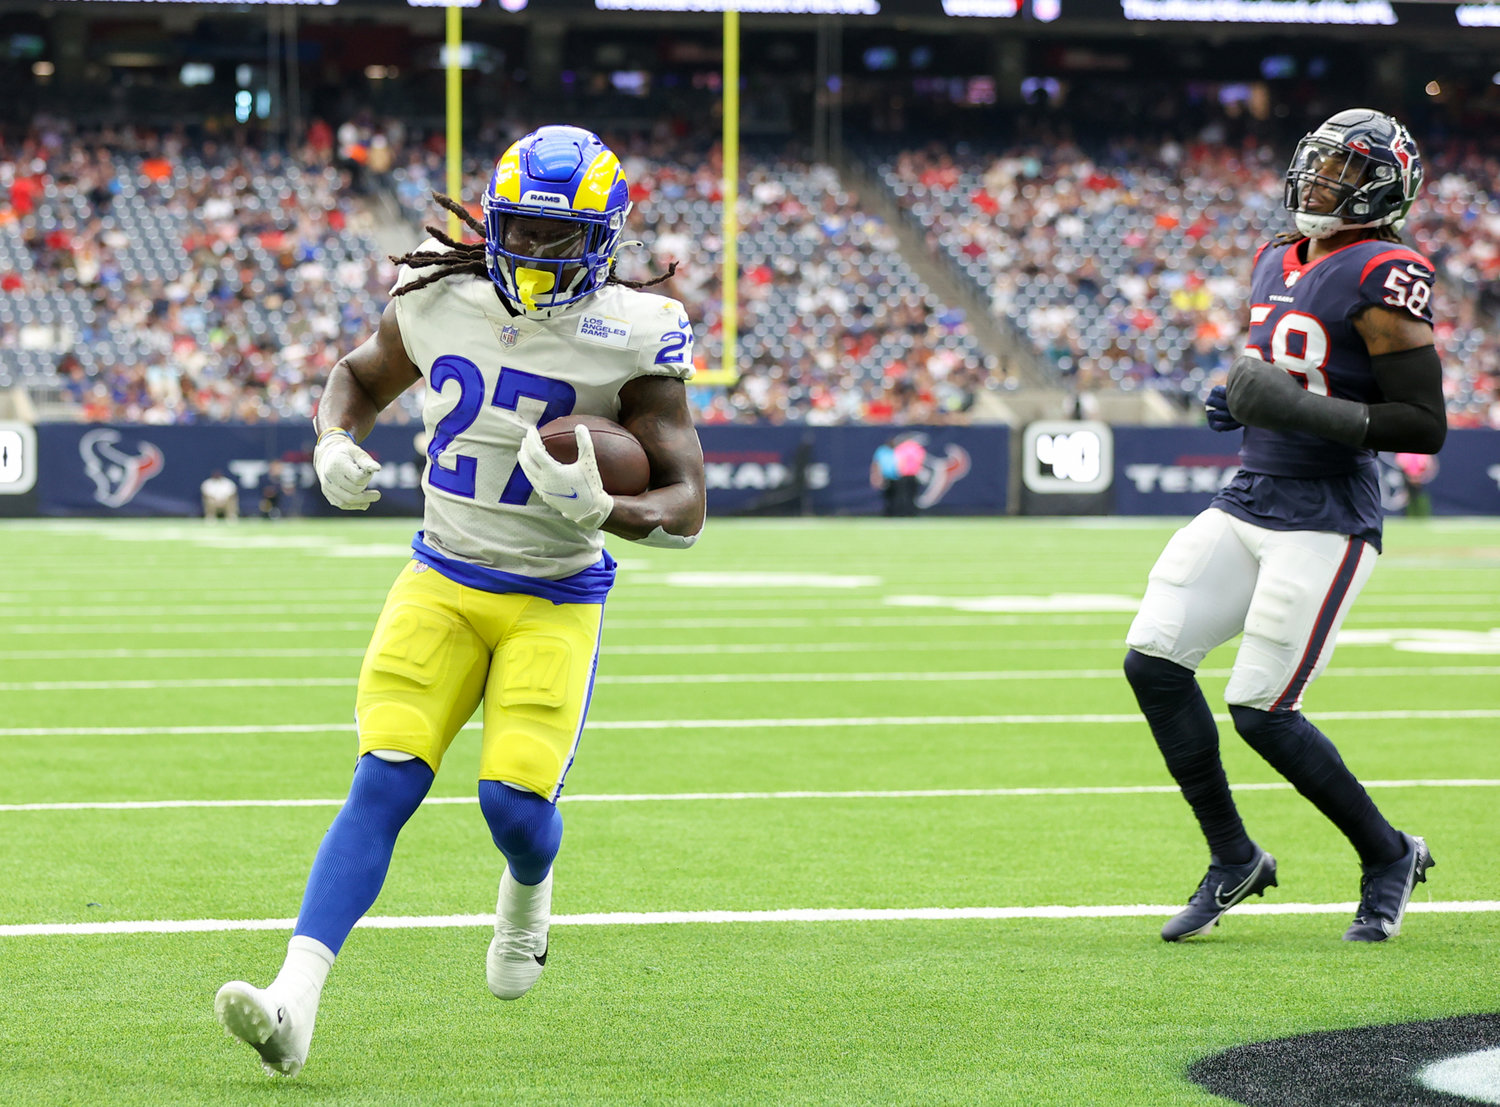 Los Angeles Rams running back Darrell Henderson Jr. (27) scores on a 3-yard touchdown reception during an NFL game between Houston and the Los Angeles Rams on October 31, 2021 in Houston, Texas.